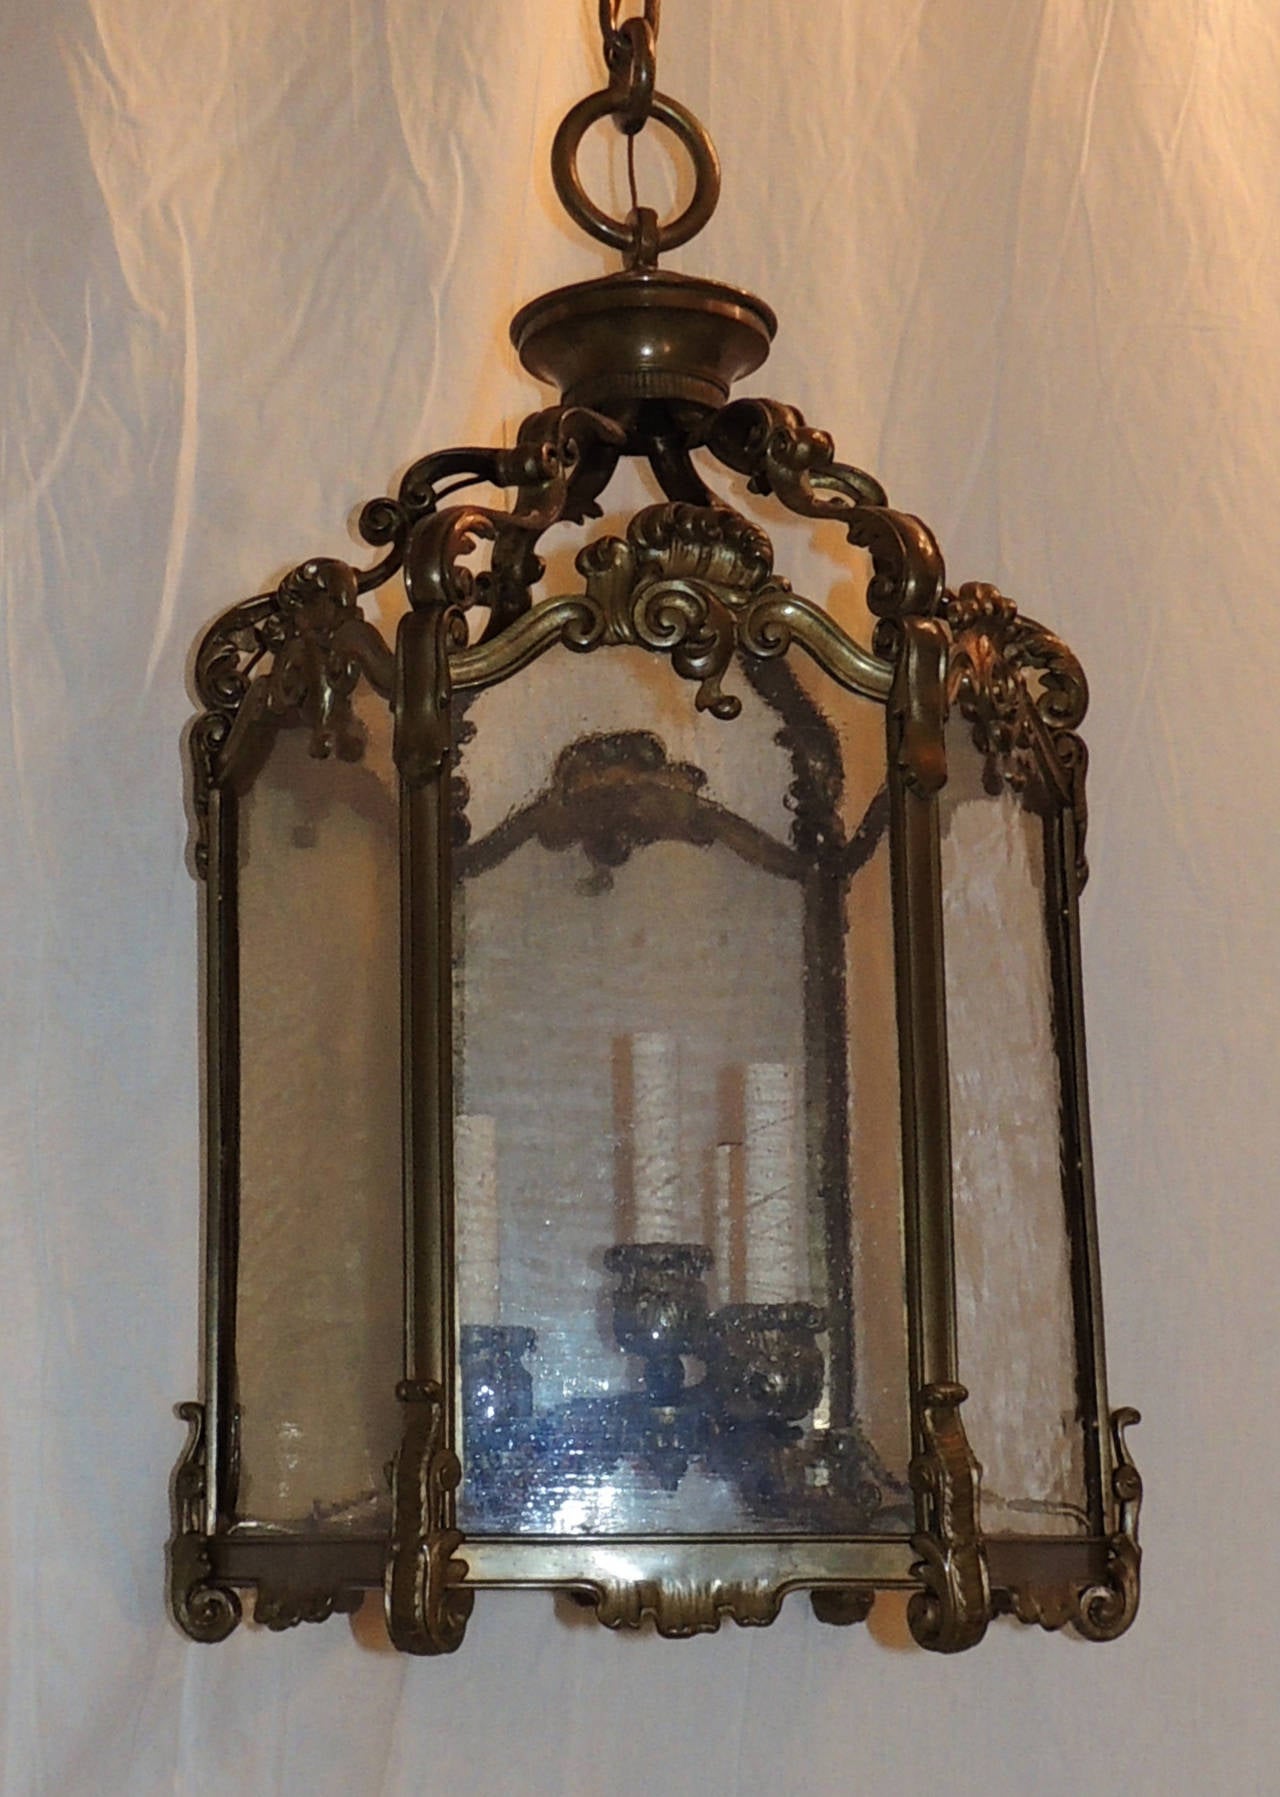 This wonderful bronze lantern by Caldwell has four lights and the original glass. Each of the hexagon sides is topped with beautiful bronze scroll design that continues at the top and on the base. The bobeches are beautifully designed with the